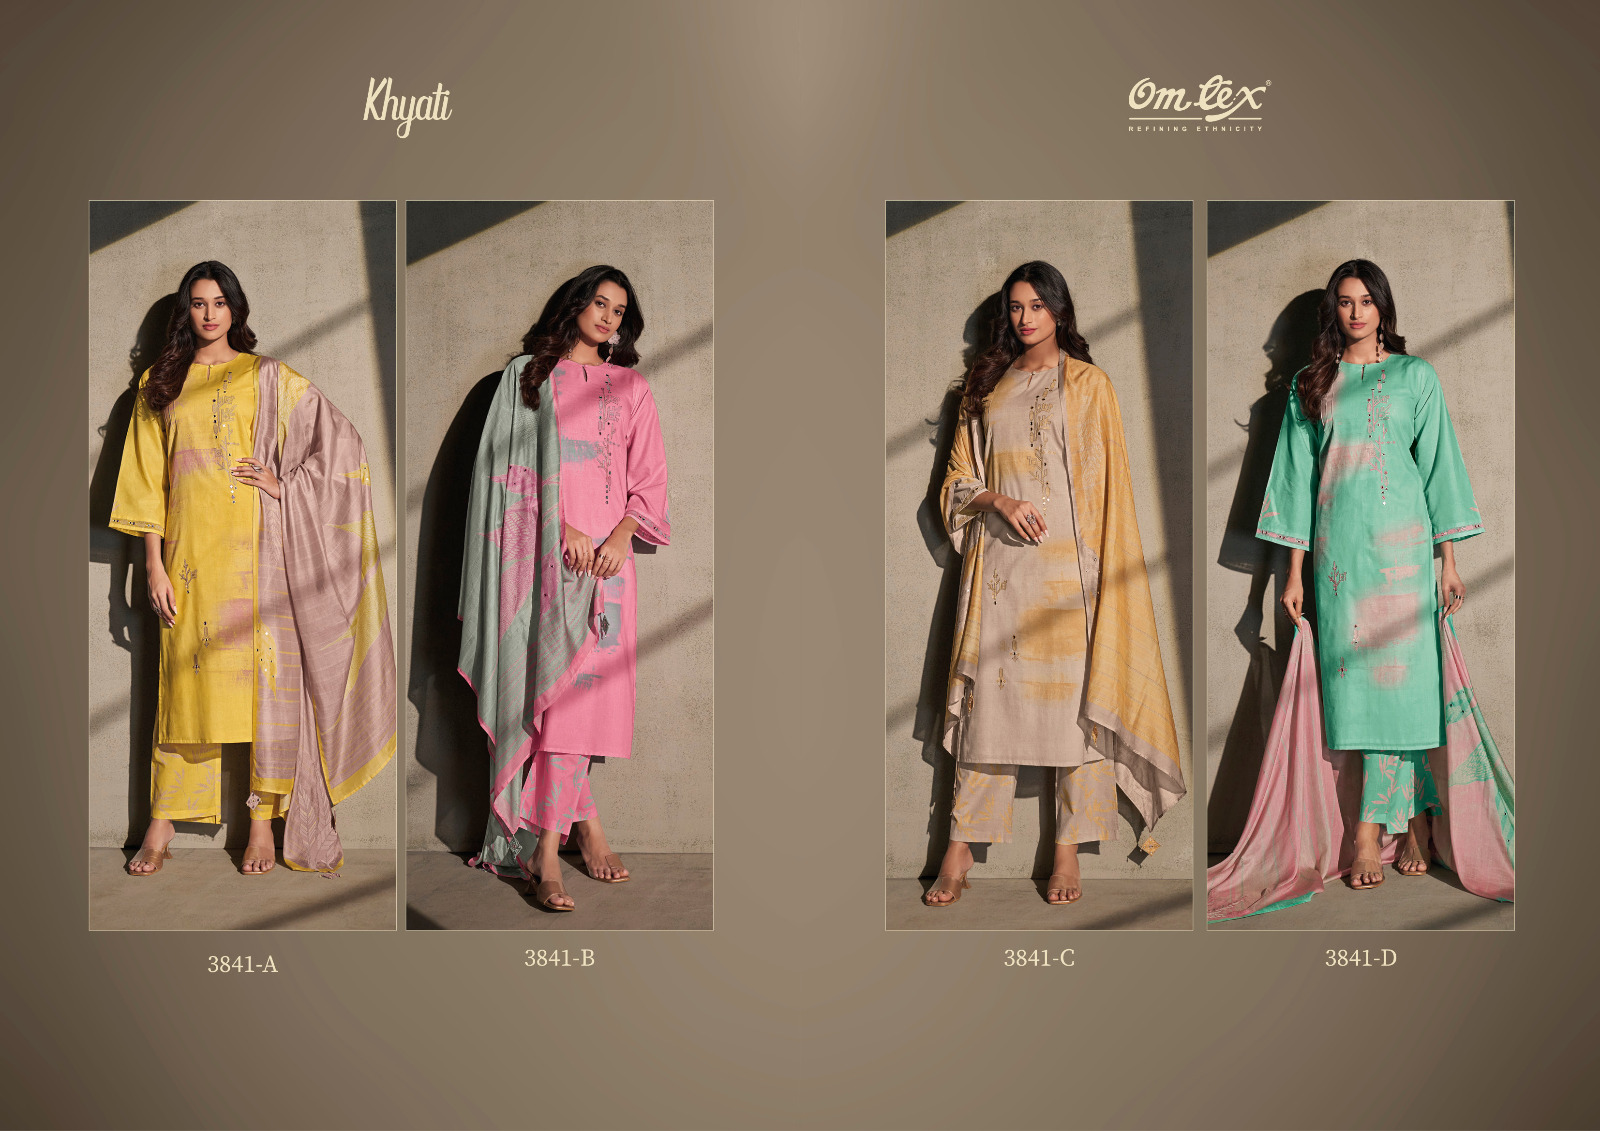 Omtex Khyati collection 3